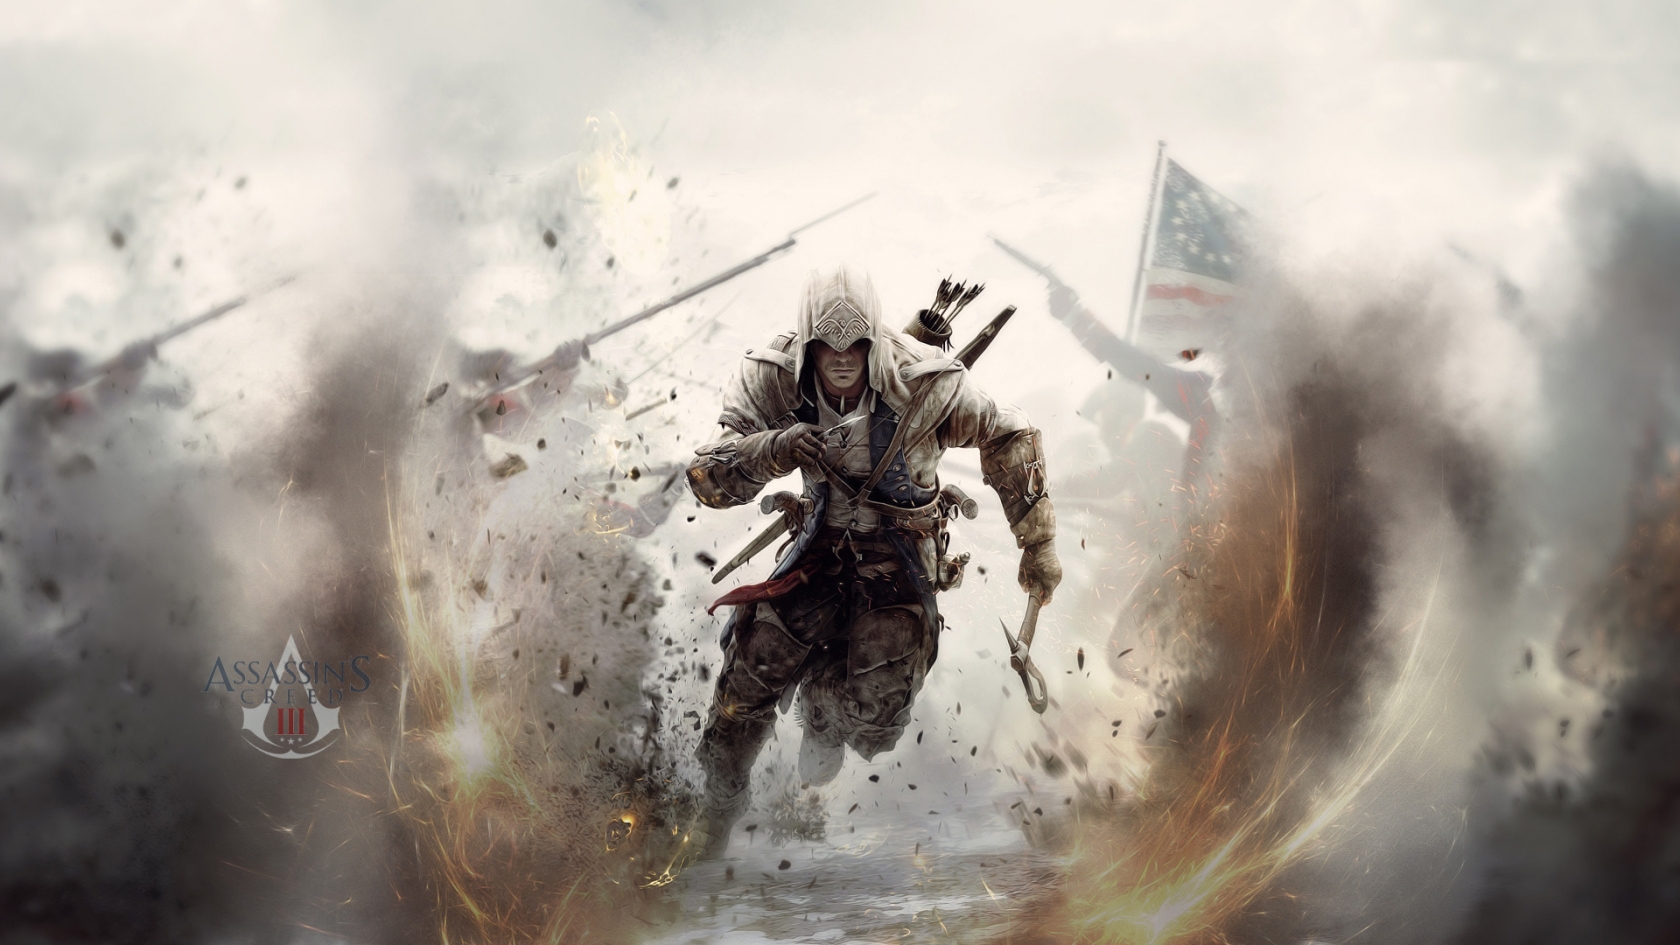 Assassins Creed 3 Game for 1680 x 945 HDTV resolution